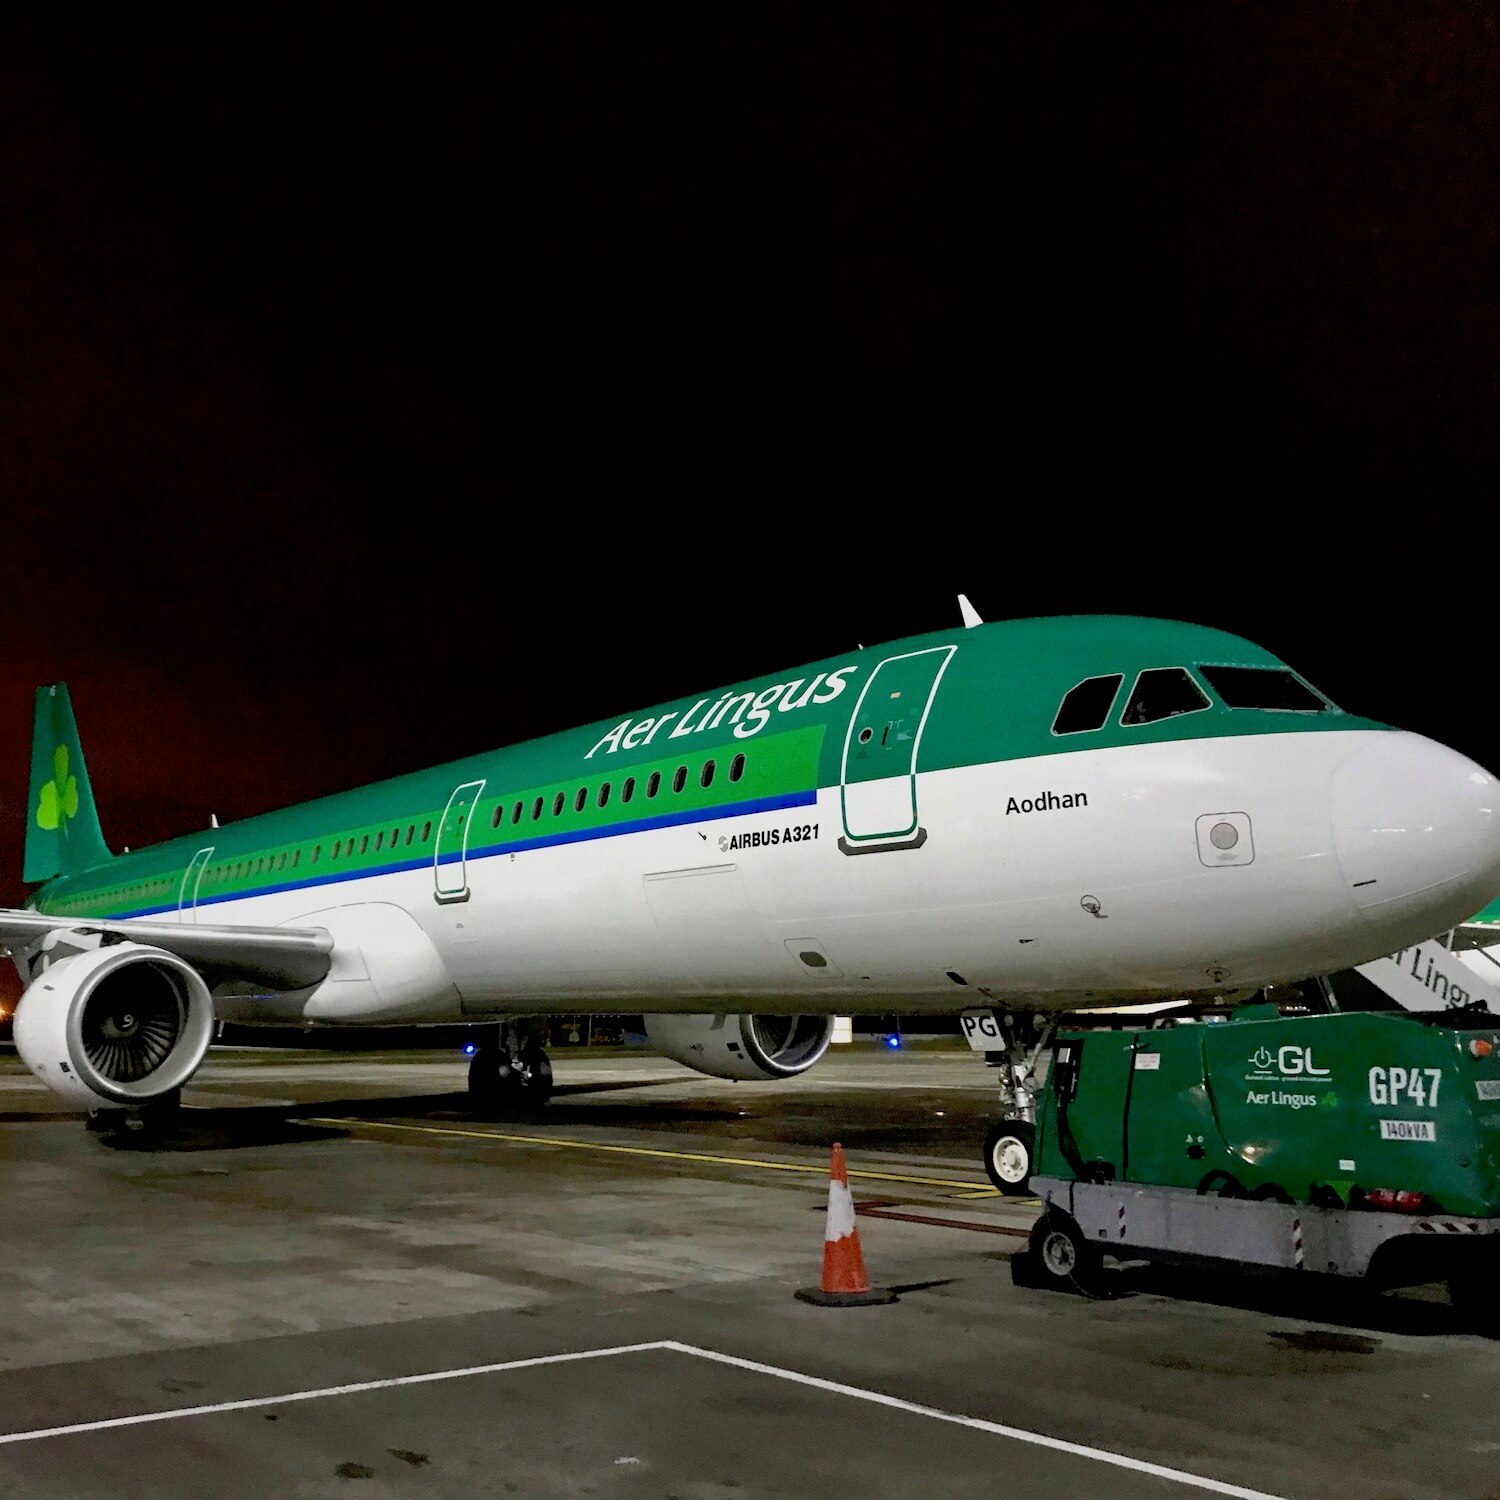 Aer Lingus A321 aircraft on the ramp in Dublin, Ireland. The nose of the plane shows the Irish name Aodhan.